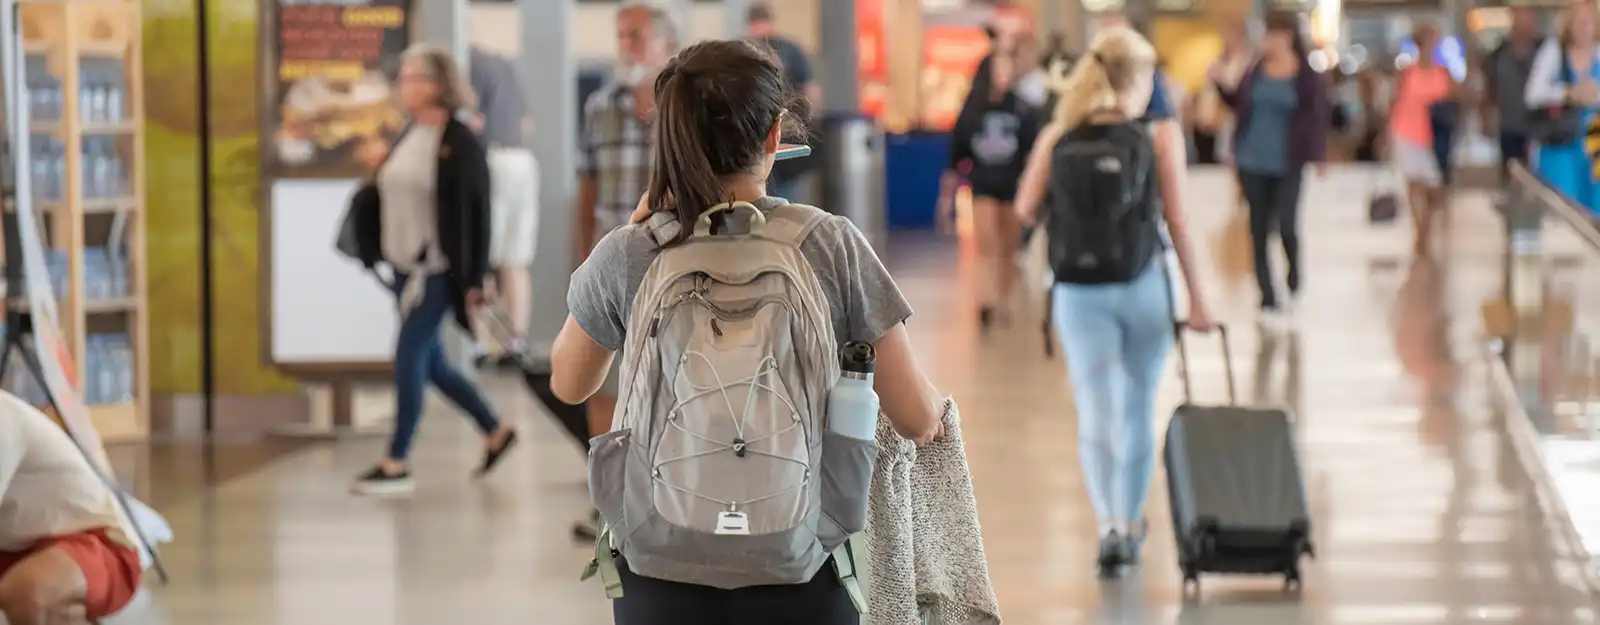 Woman with backpack walking through airport terminal